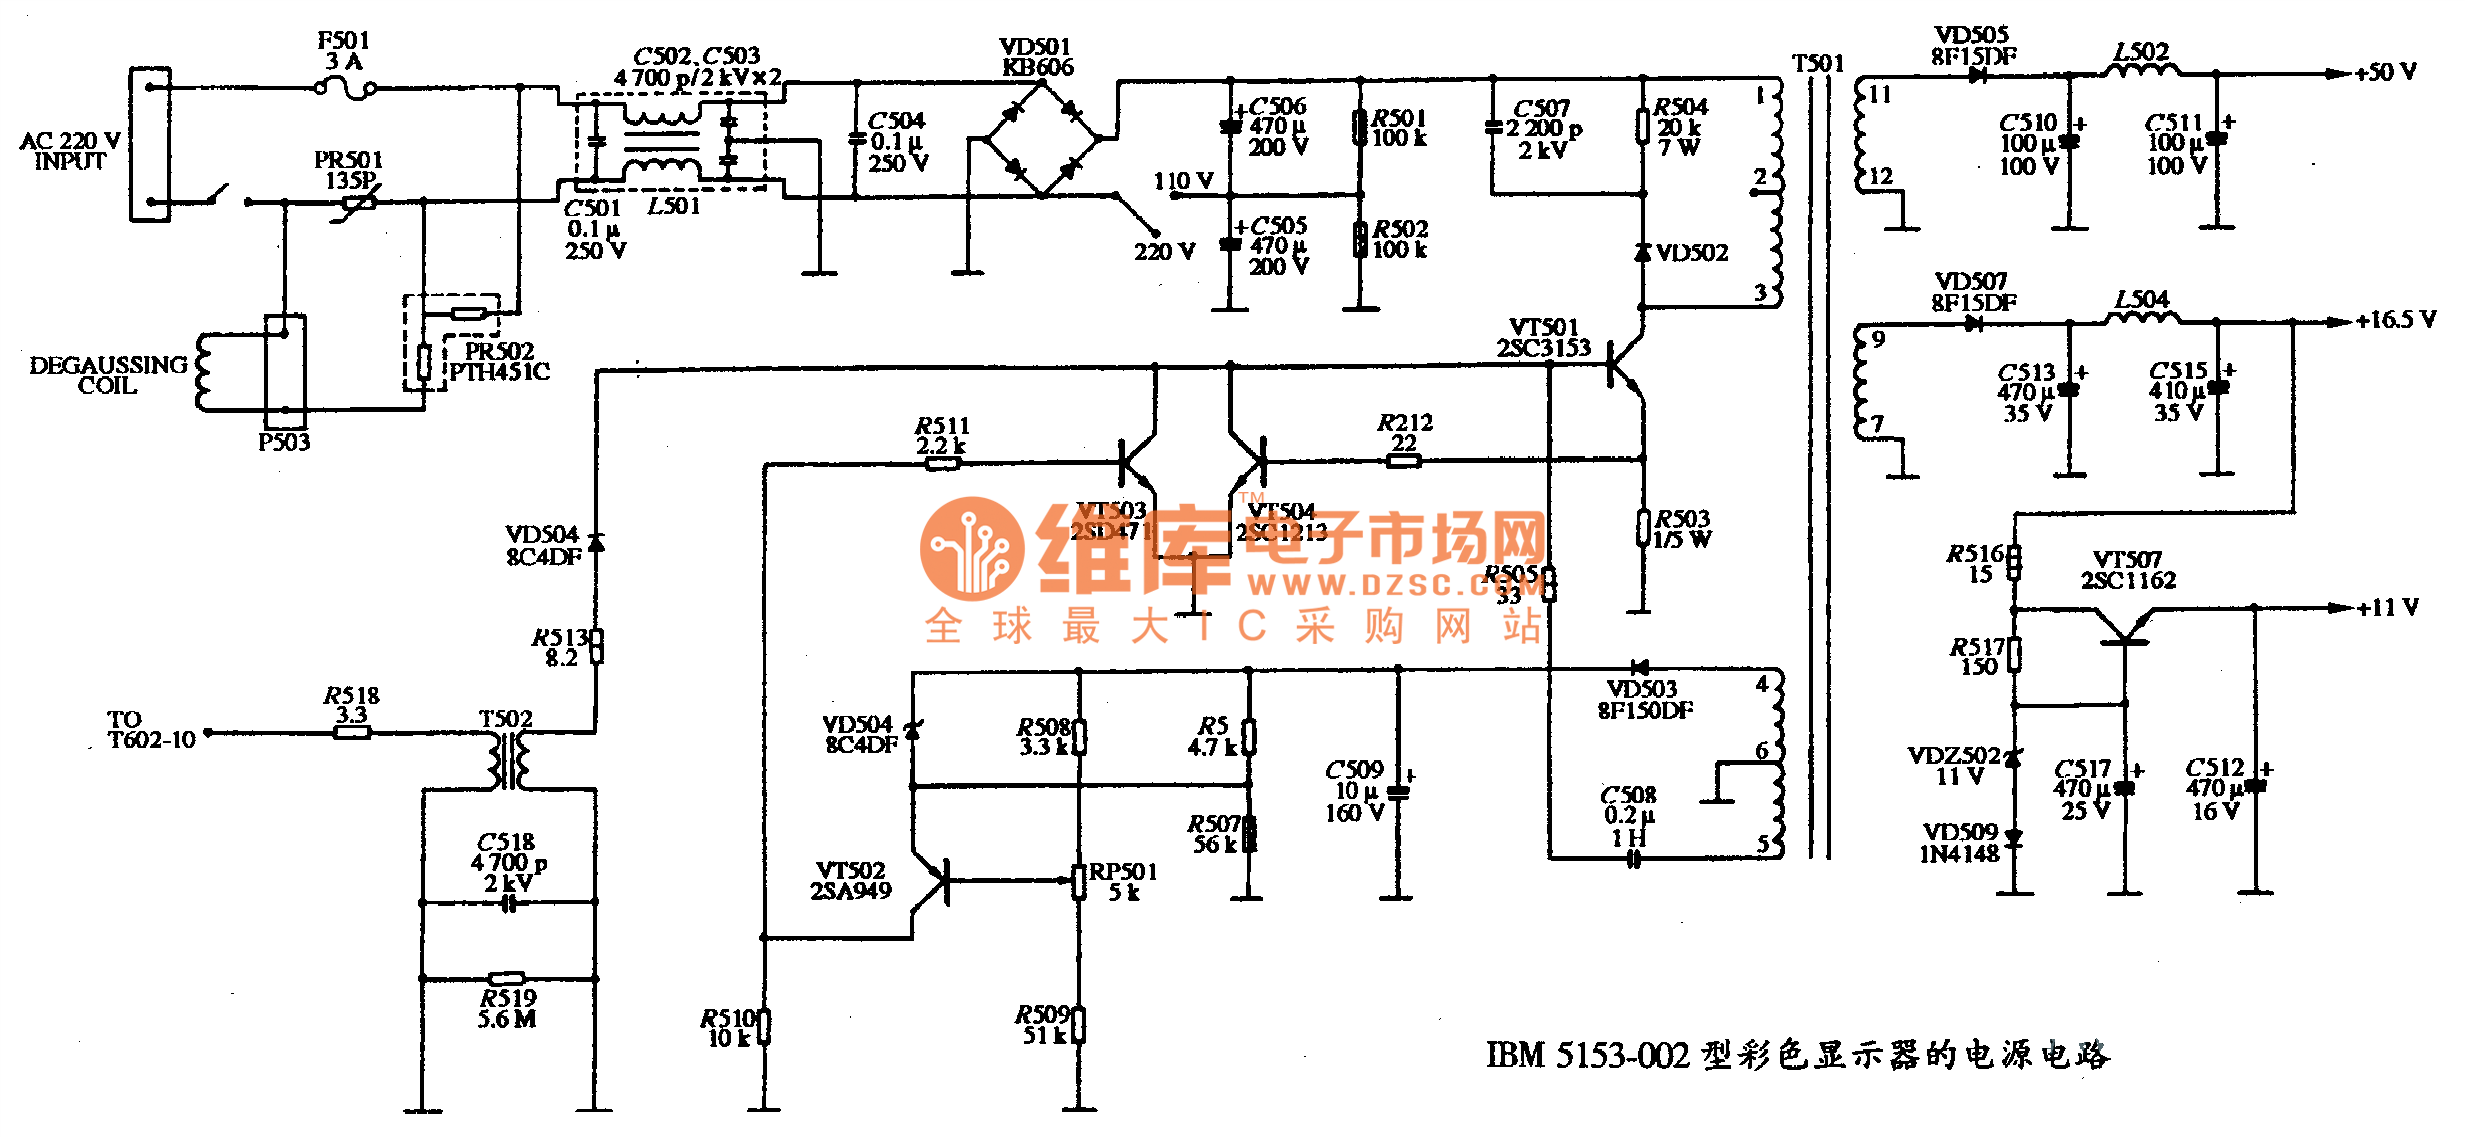 The power supply circuit diagram of IBM 5153-002 color display - Power